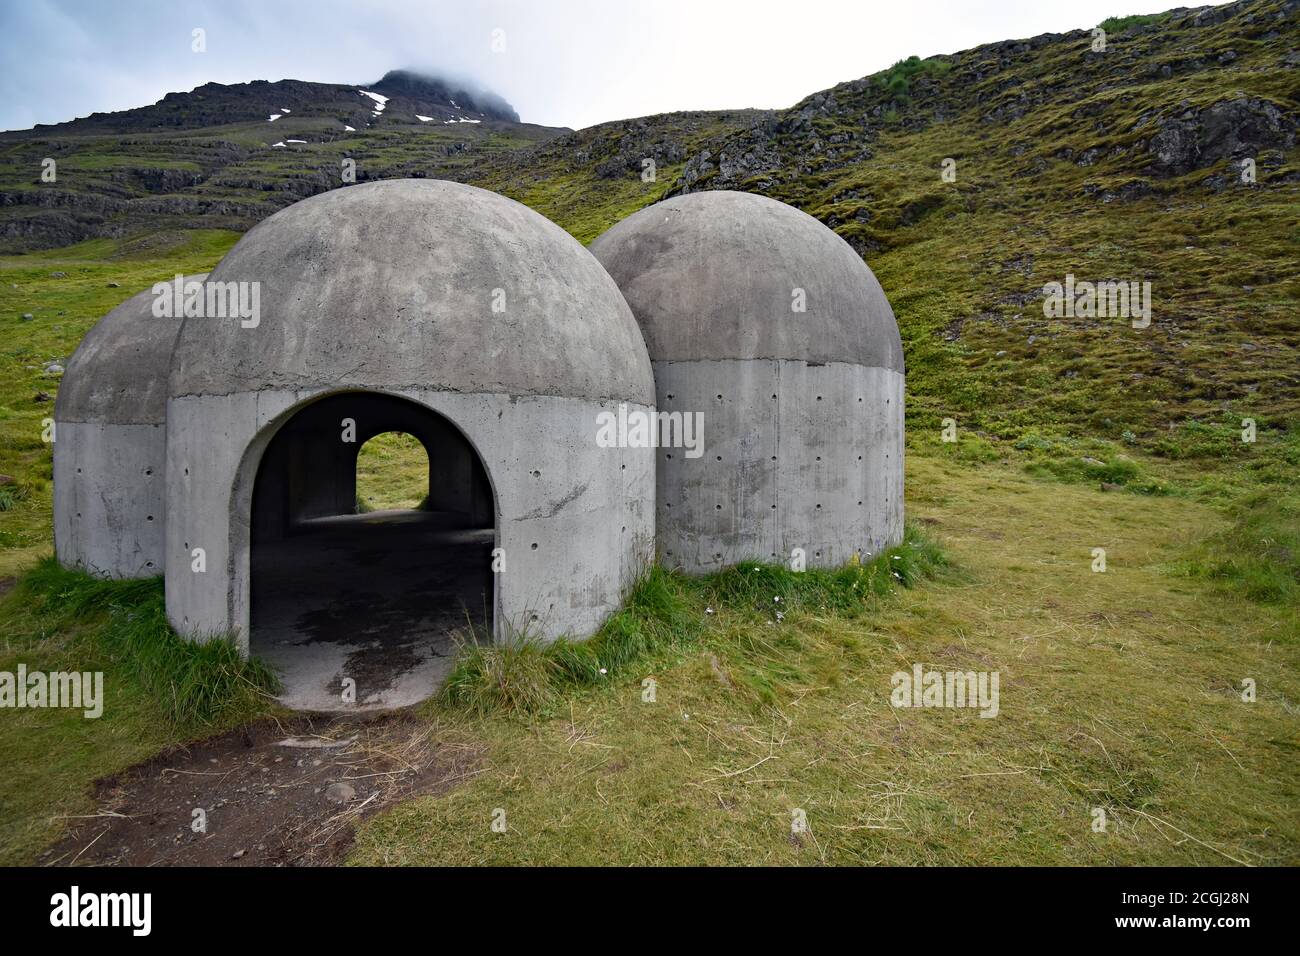 The Tvísöngur Sound Sculpture on a mountainside in Seydisfjordur, Eastfjords, Iceland.  The concrete sculpture is surrounded by green grass. Stock Photo